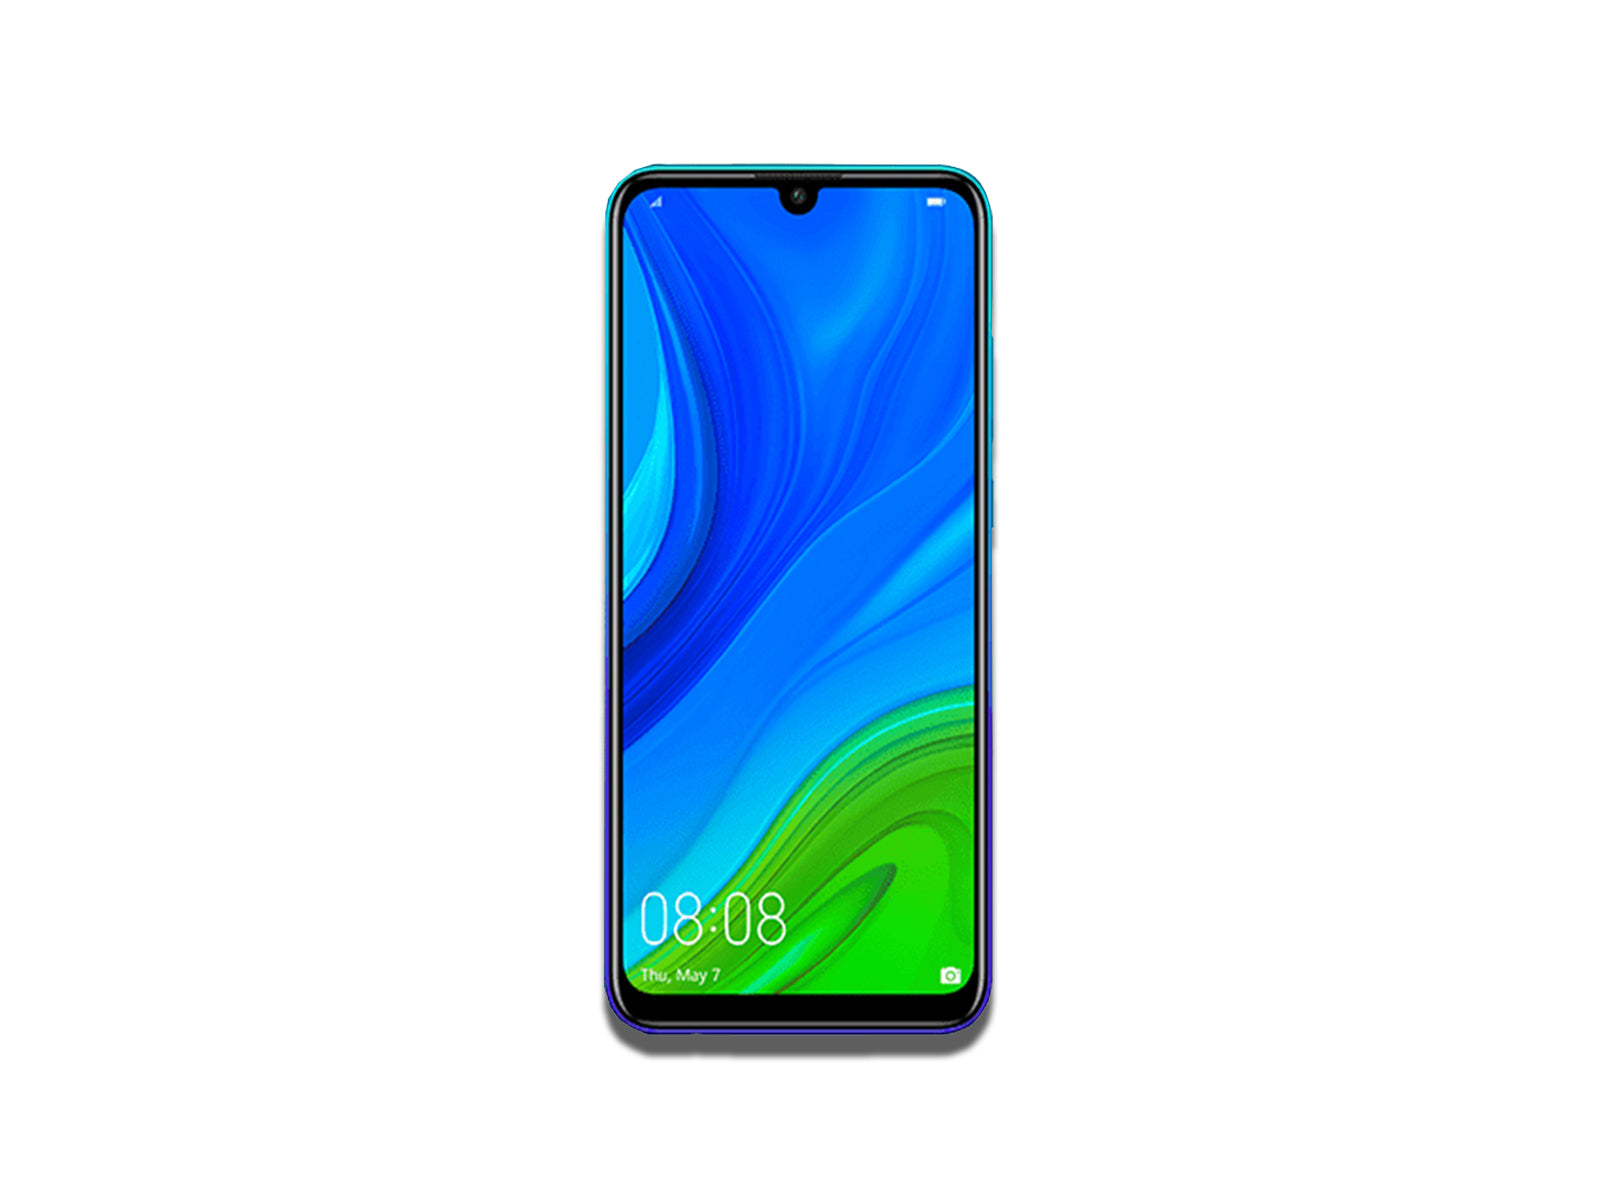 Front View Image of The Blue Huawei Nova Lite 3 Phone on The White Background